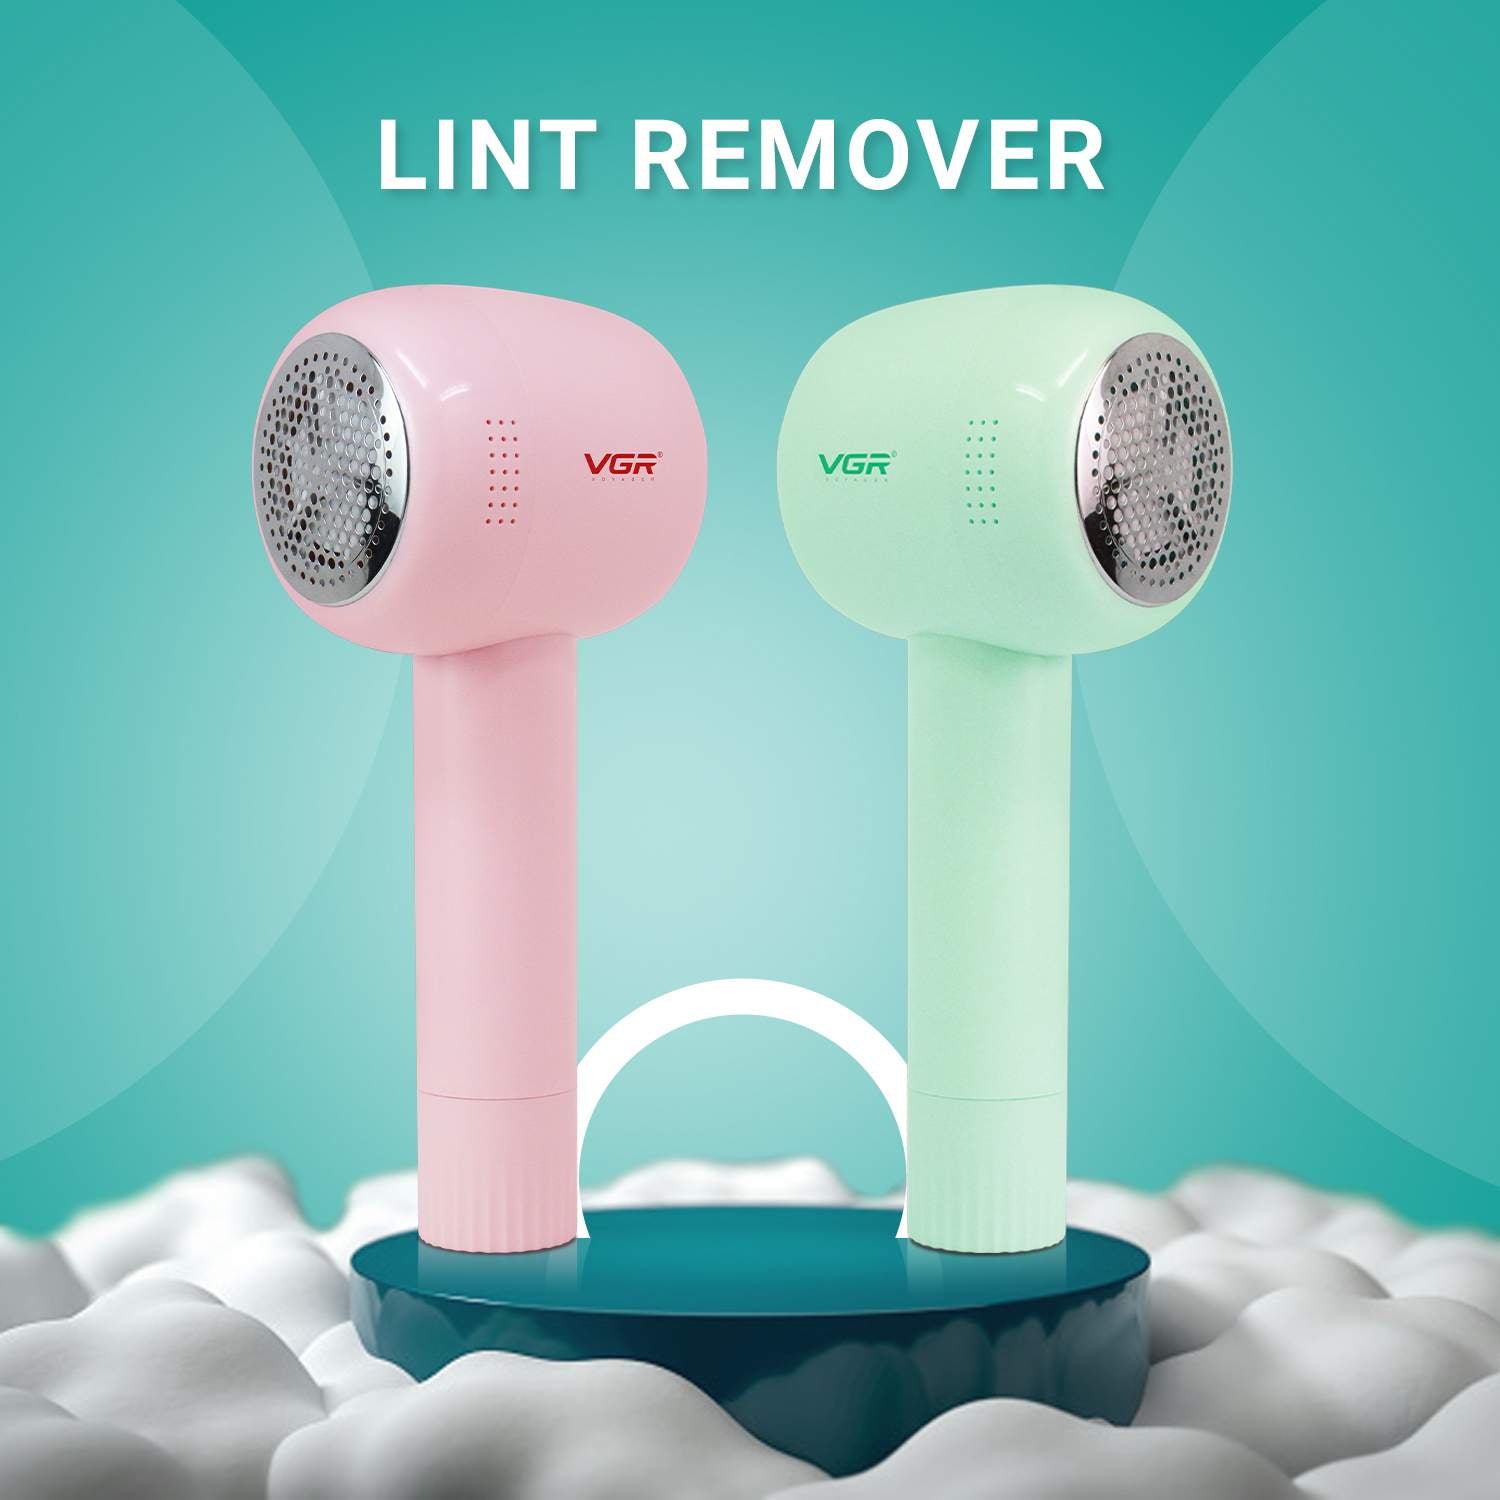 Lint Remover - VGR Official India